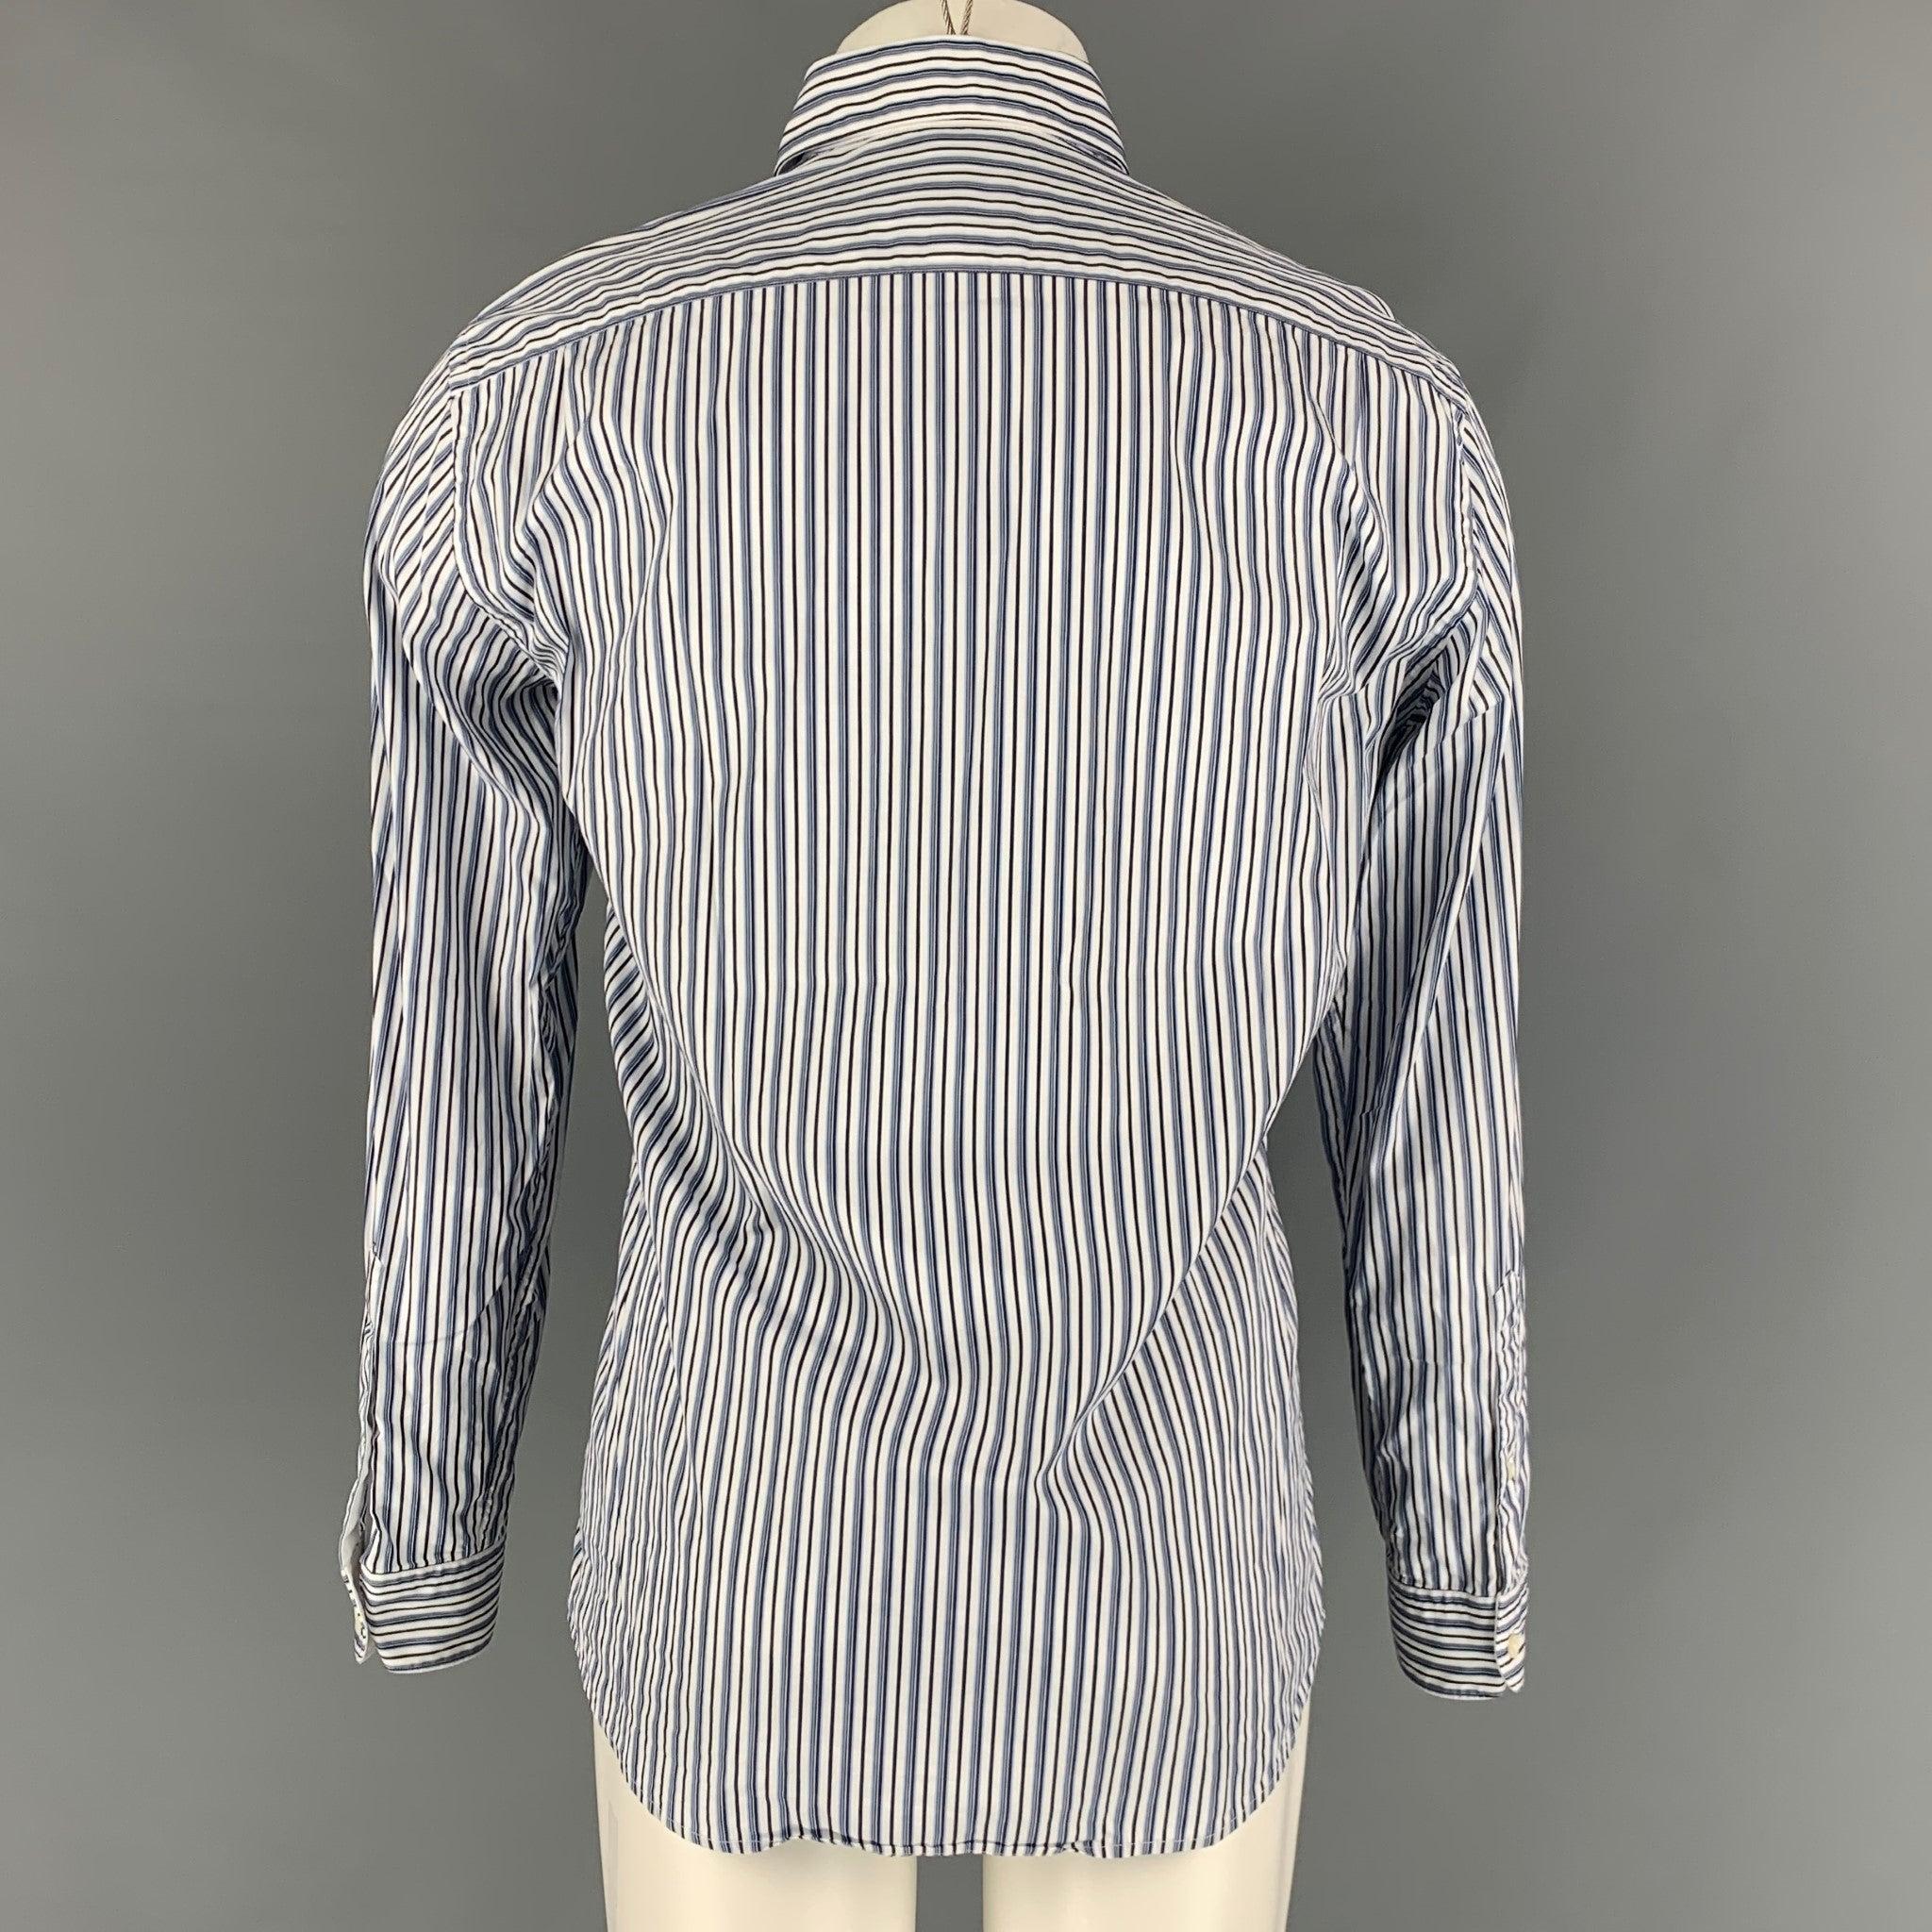 ERMENEGILDO ZEGNA Size M White & Navy Stripe Cotton Long Sleeve Shirt In Excellent Condition For Sale In San Francisco, CA